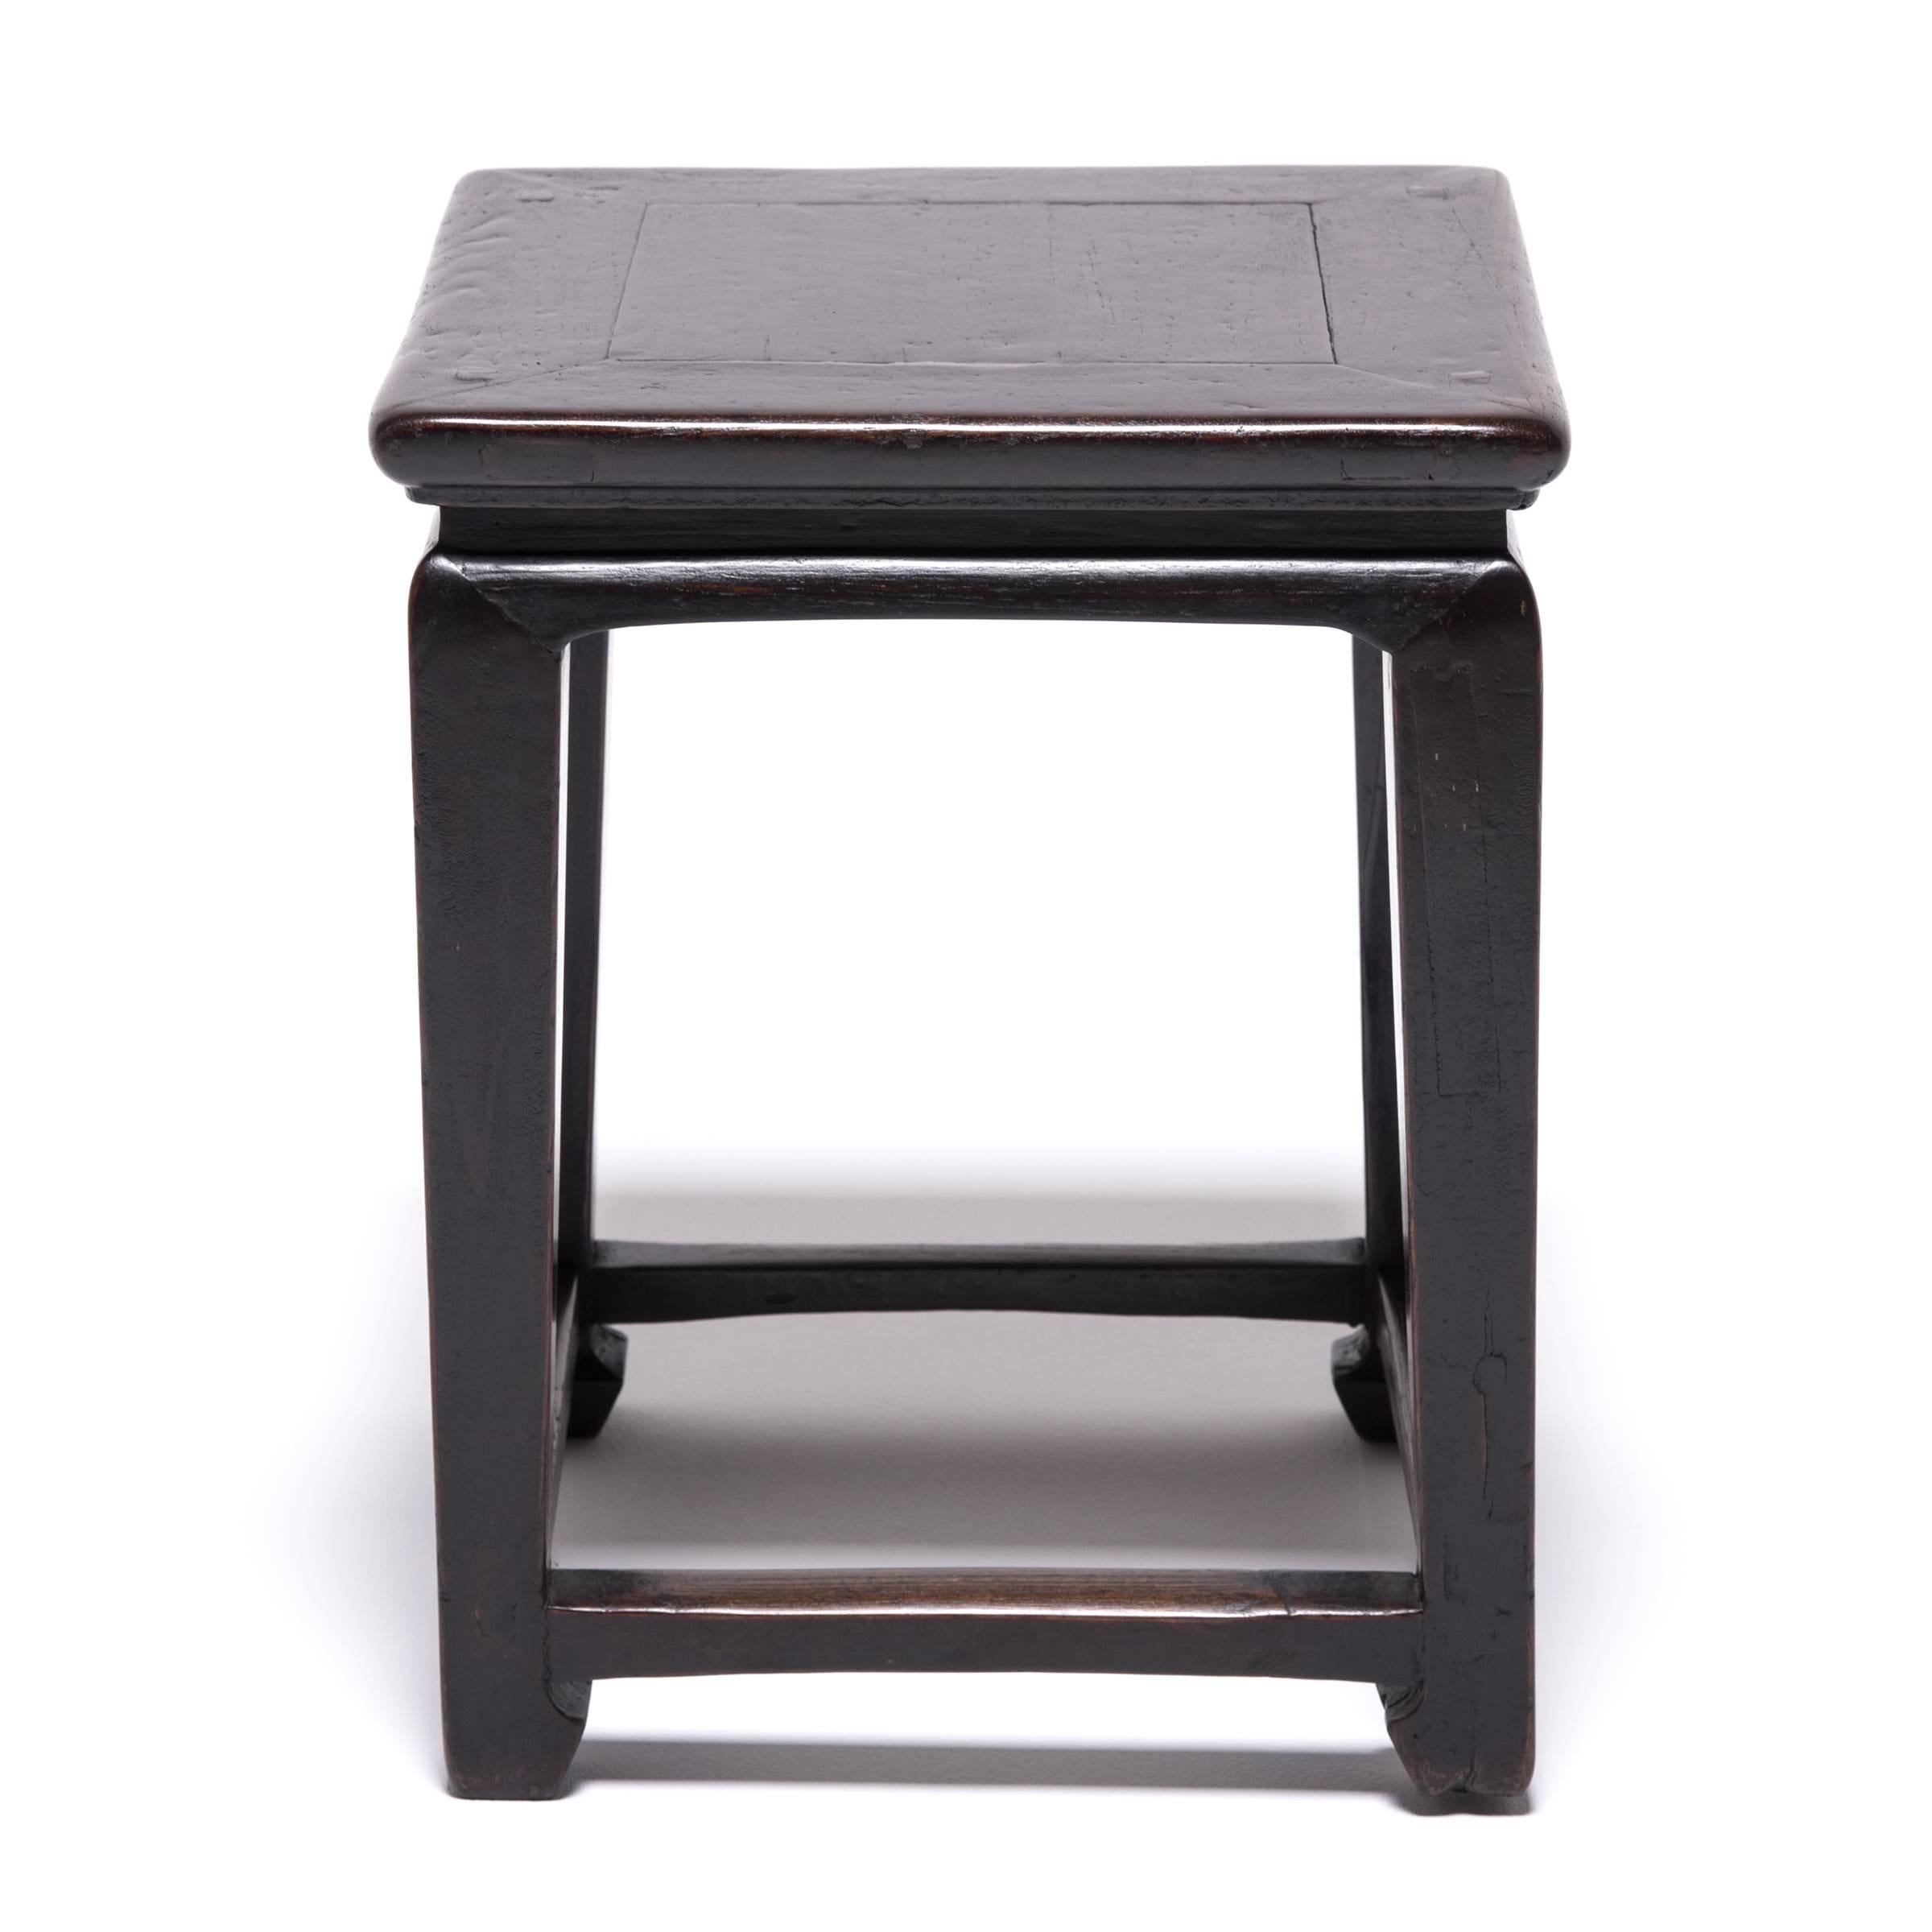 It would be hard to improve upon the Qing-dynasty stool. “Feng” meaning square and “deng” meaning stool, the design is at once functional and inspired. Constructed with masterful carpentry, the stool unites function and form in a refined Silhouette